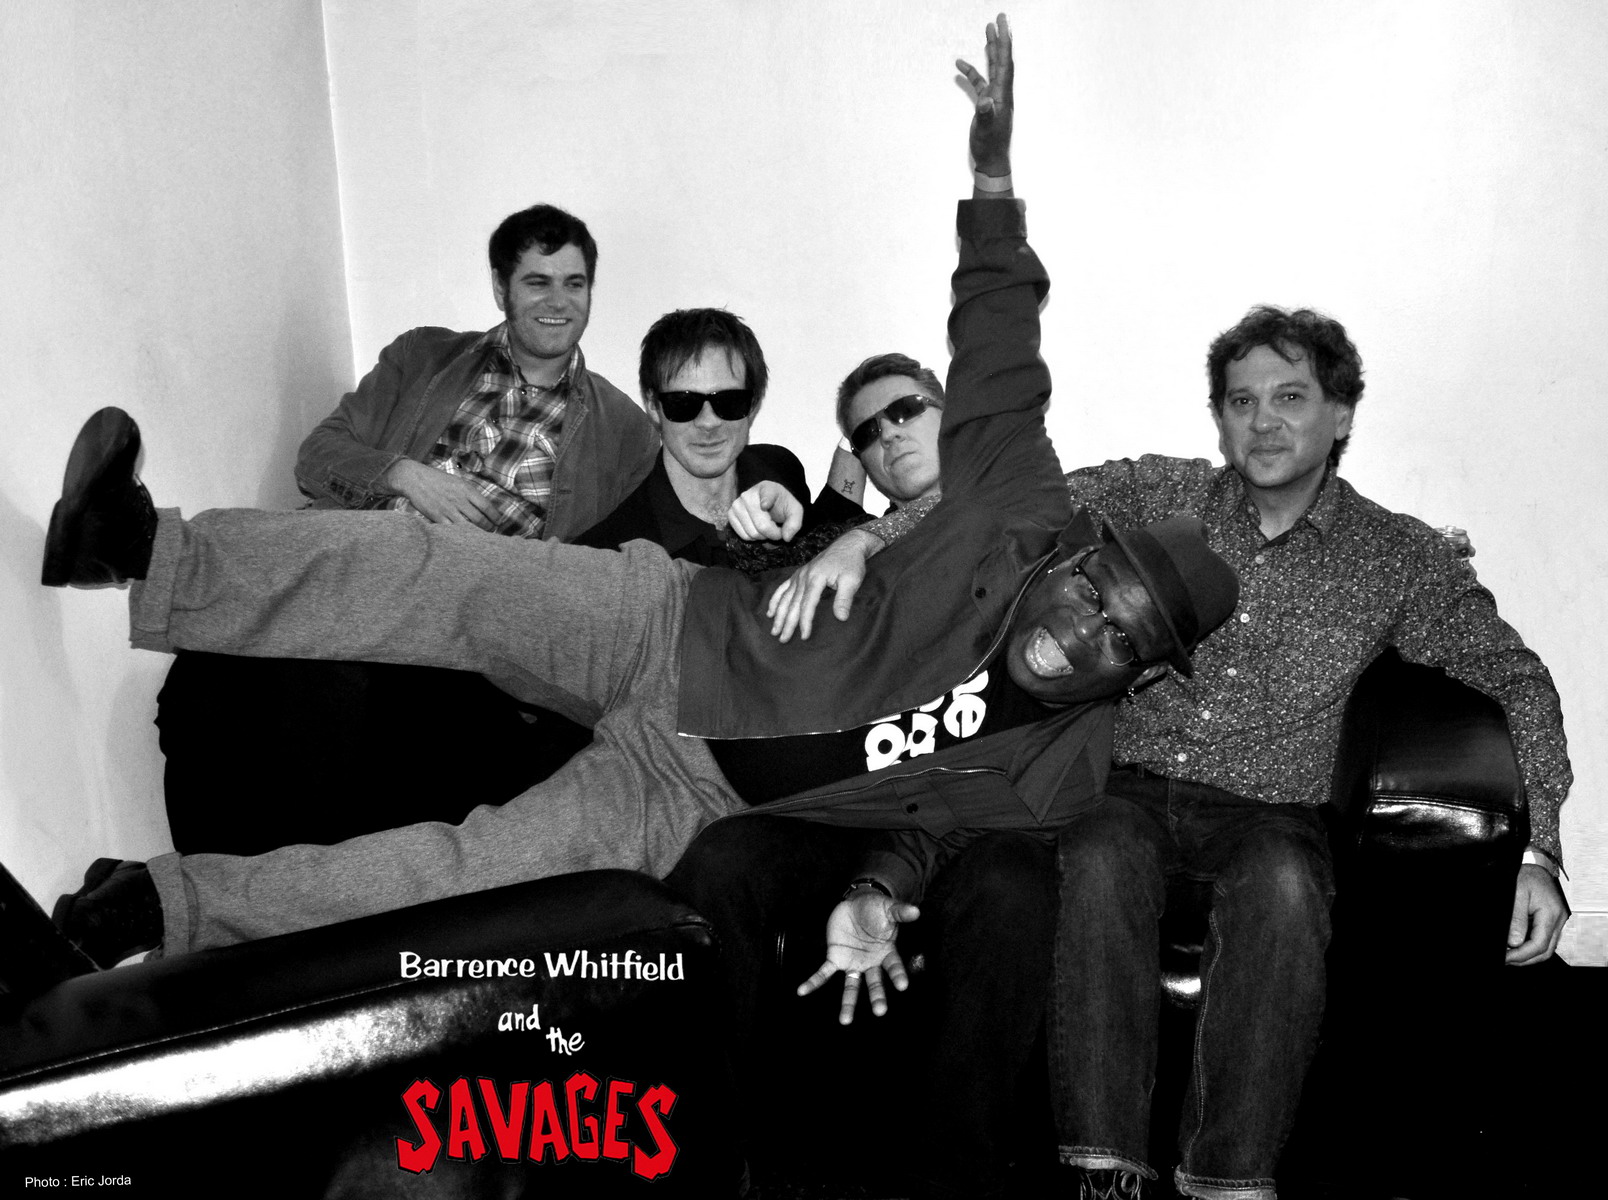 http://jostonetraffic.com/site/wp-content/uploads/2012/03/Copie-deBarrence-Whitfield-And-The-Savages-Black-N-White-Promo-02-FINAL.jpg